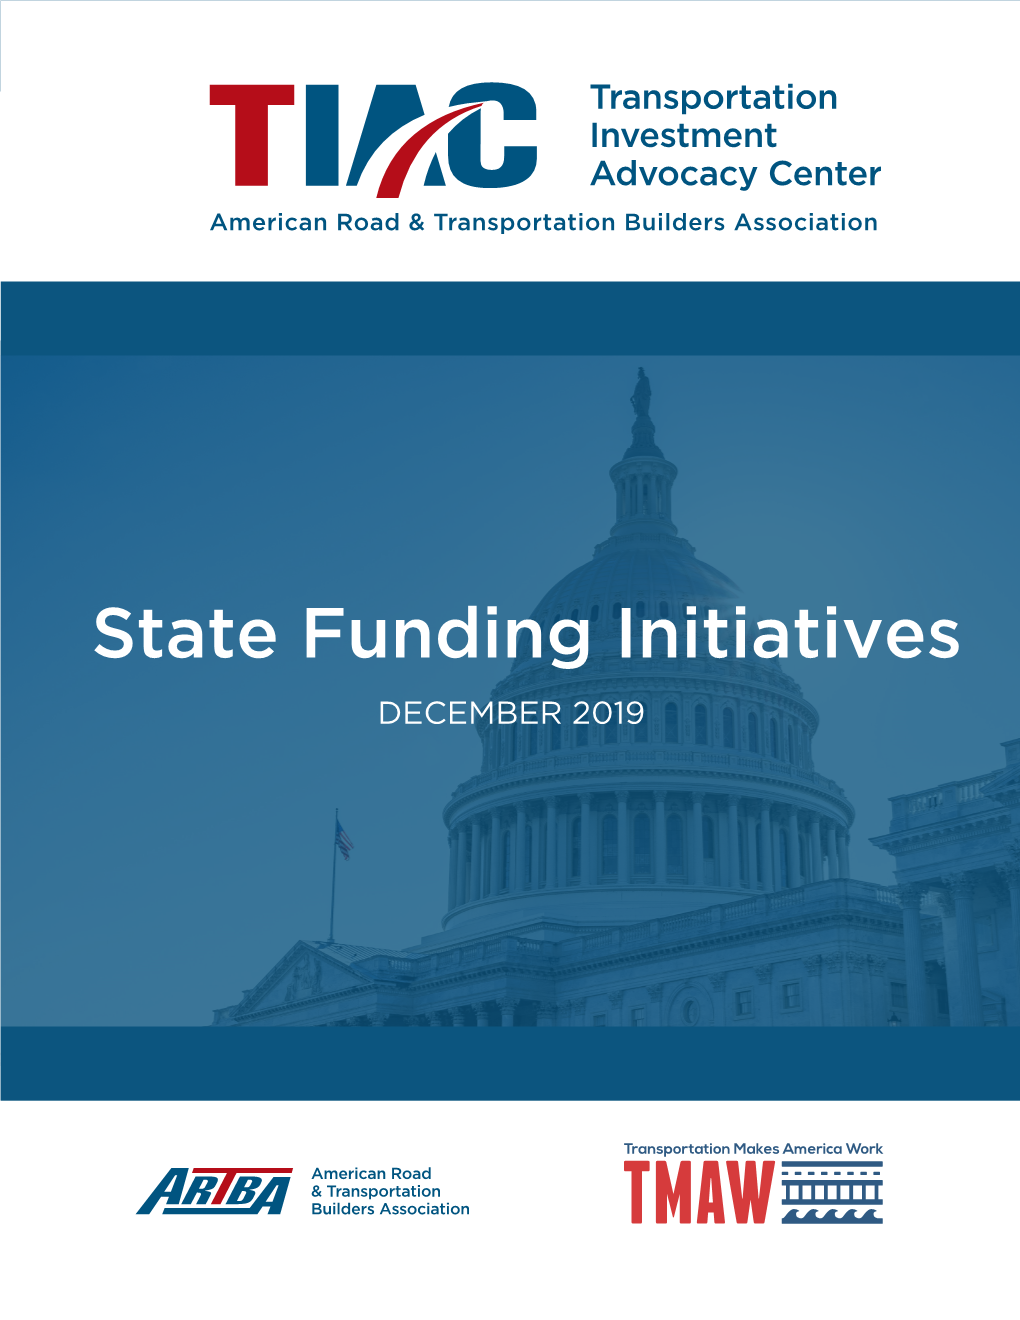 State Funding Initiatives Initiatives State Funding